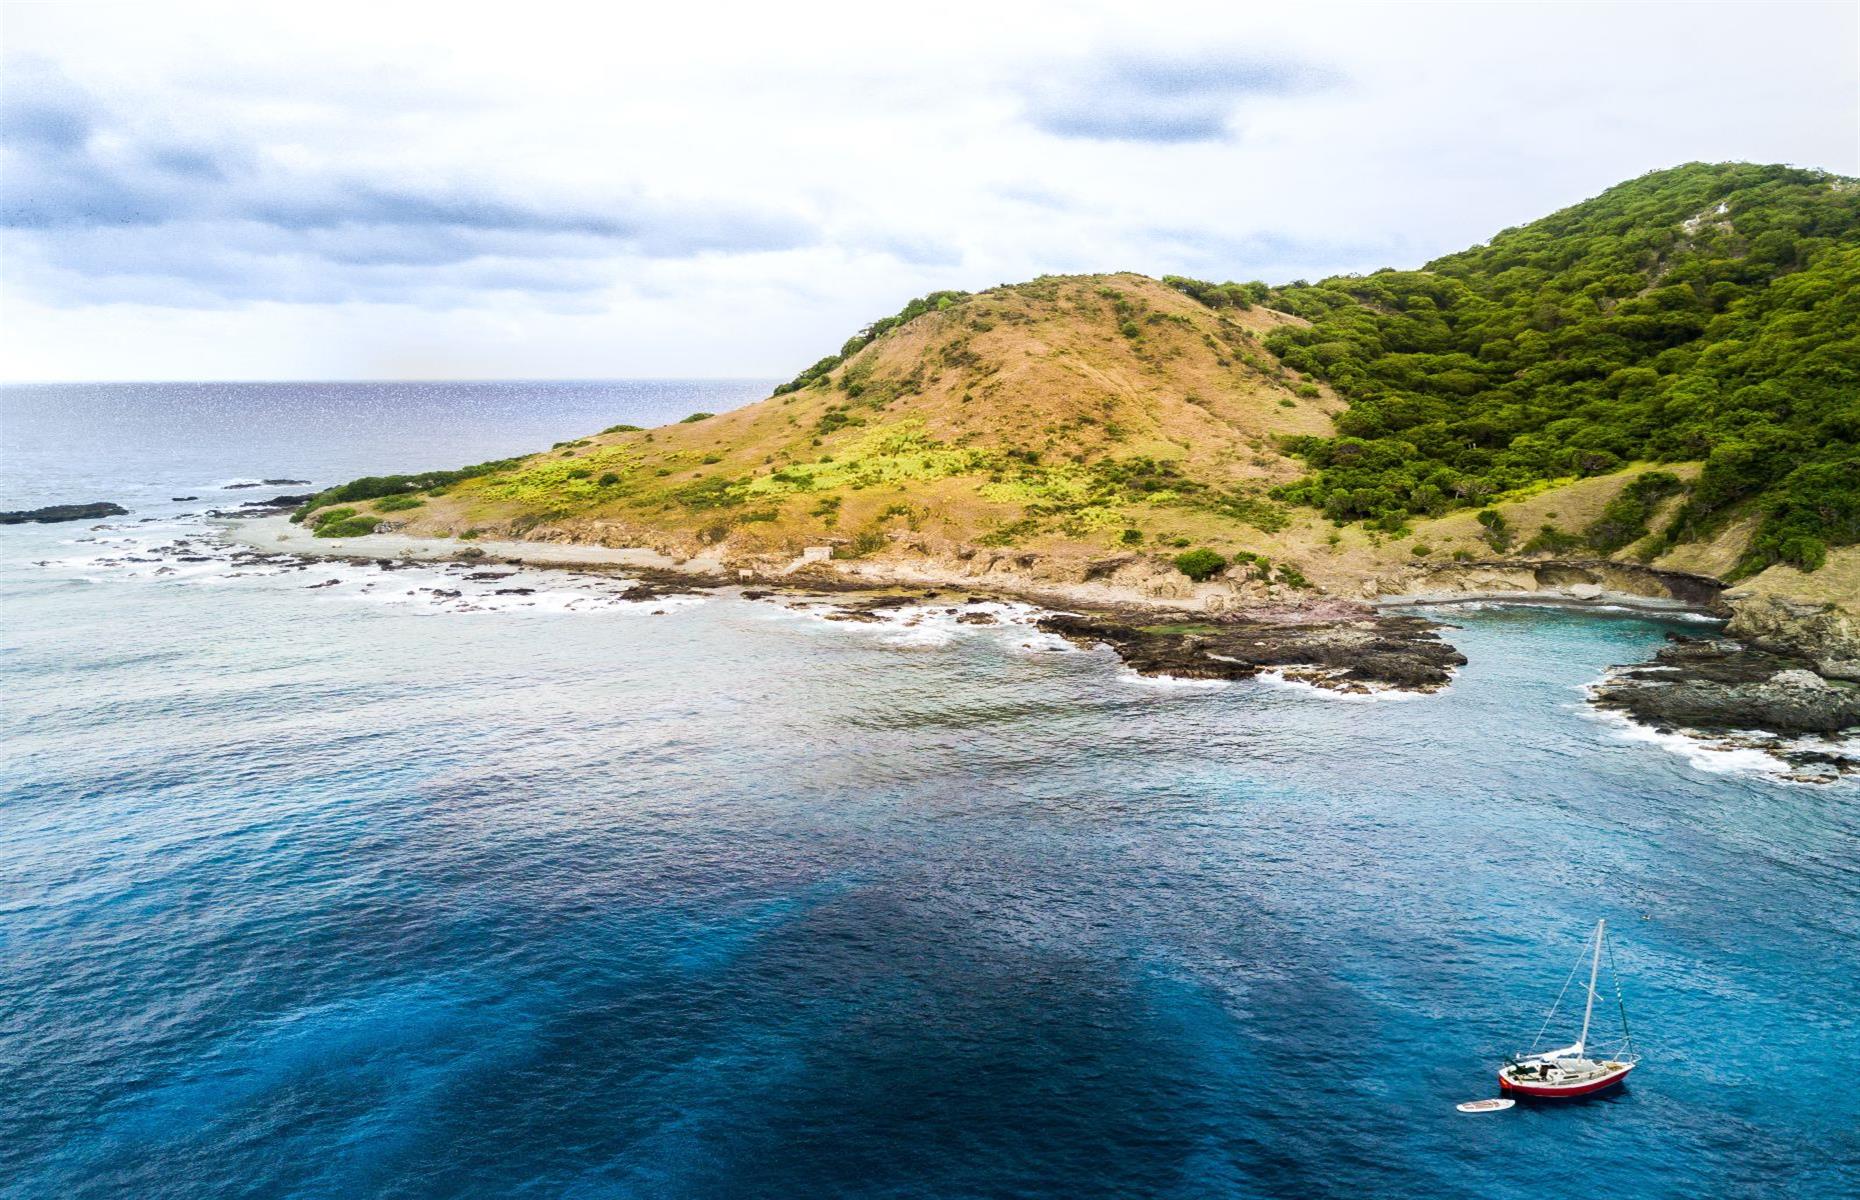 <p>The coral reefs around Puerto Rico<span>’</span>s islands and cays offer some magical snorkeling and diving experiences, and the chance to swim with a huge diversity of tropical fish and larger marine life, including manta rays. Join a <a href="https://sailgetaway.com/charters/cordillera-cays-sailing-catamaran-beach-snorkeling-tour/">catamaran tour</a> or take a water taxi from Fajardo to the deserted island of Cayo Icacos – the largest in a remote collection of sandy cays in La Cordillera Nature Reserve – and you’ll soon be snorkeling in some of the east coast’s clearest waters.</p>  <p><a href="https://www.loveexploring.com/galleryextended/65459/incredible-private-islands-you-can-actually-afford-to-rent"><strong>Now check out these incredible private islands you can actually afford to rent</strong></a></p>